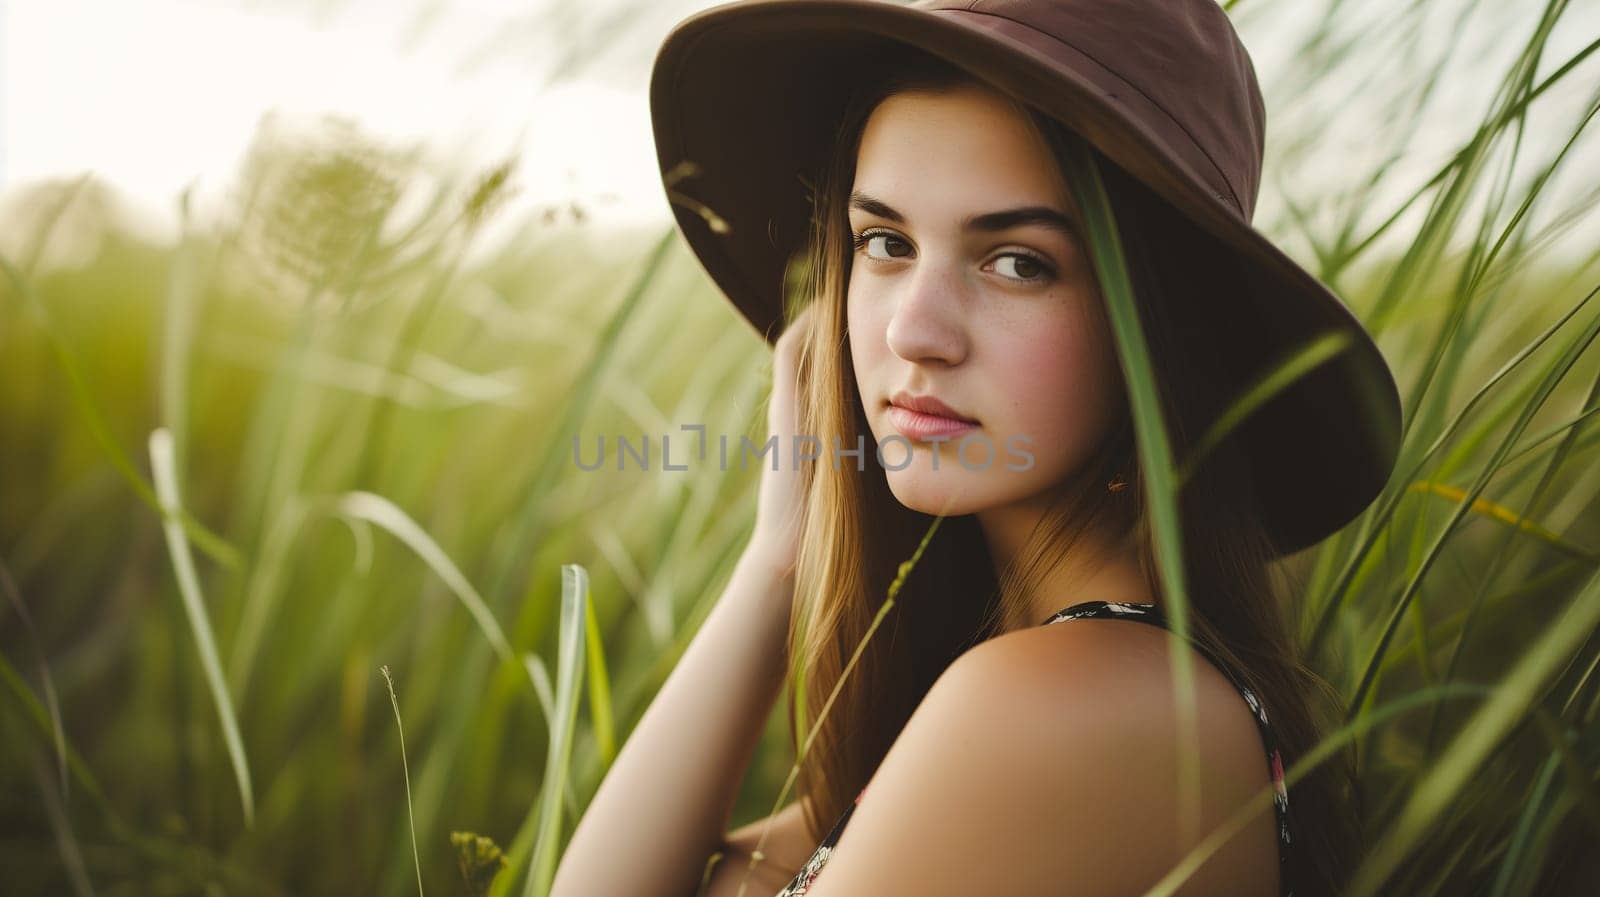 Young Woman in a Hat Amidst Tall Grass at Dusk by chrisroll